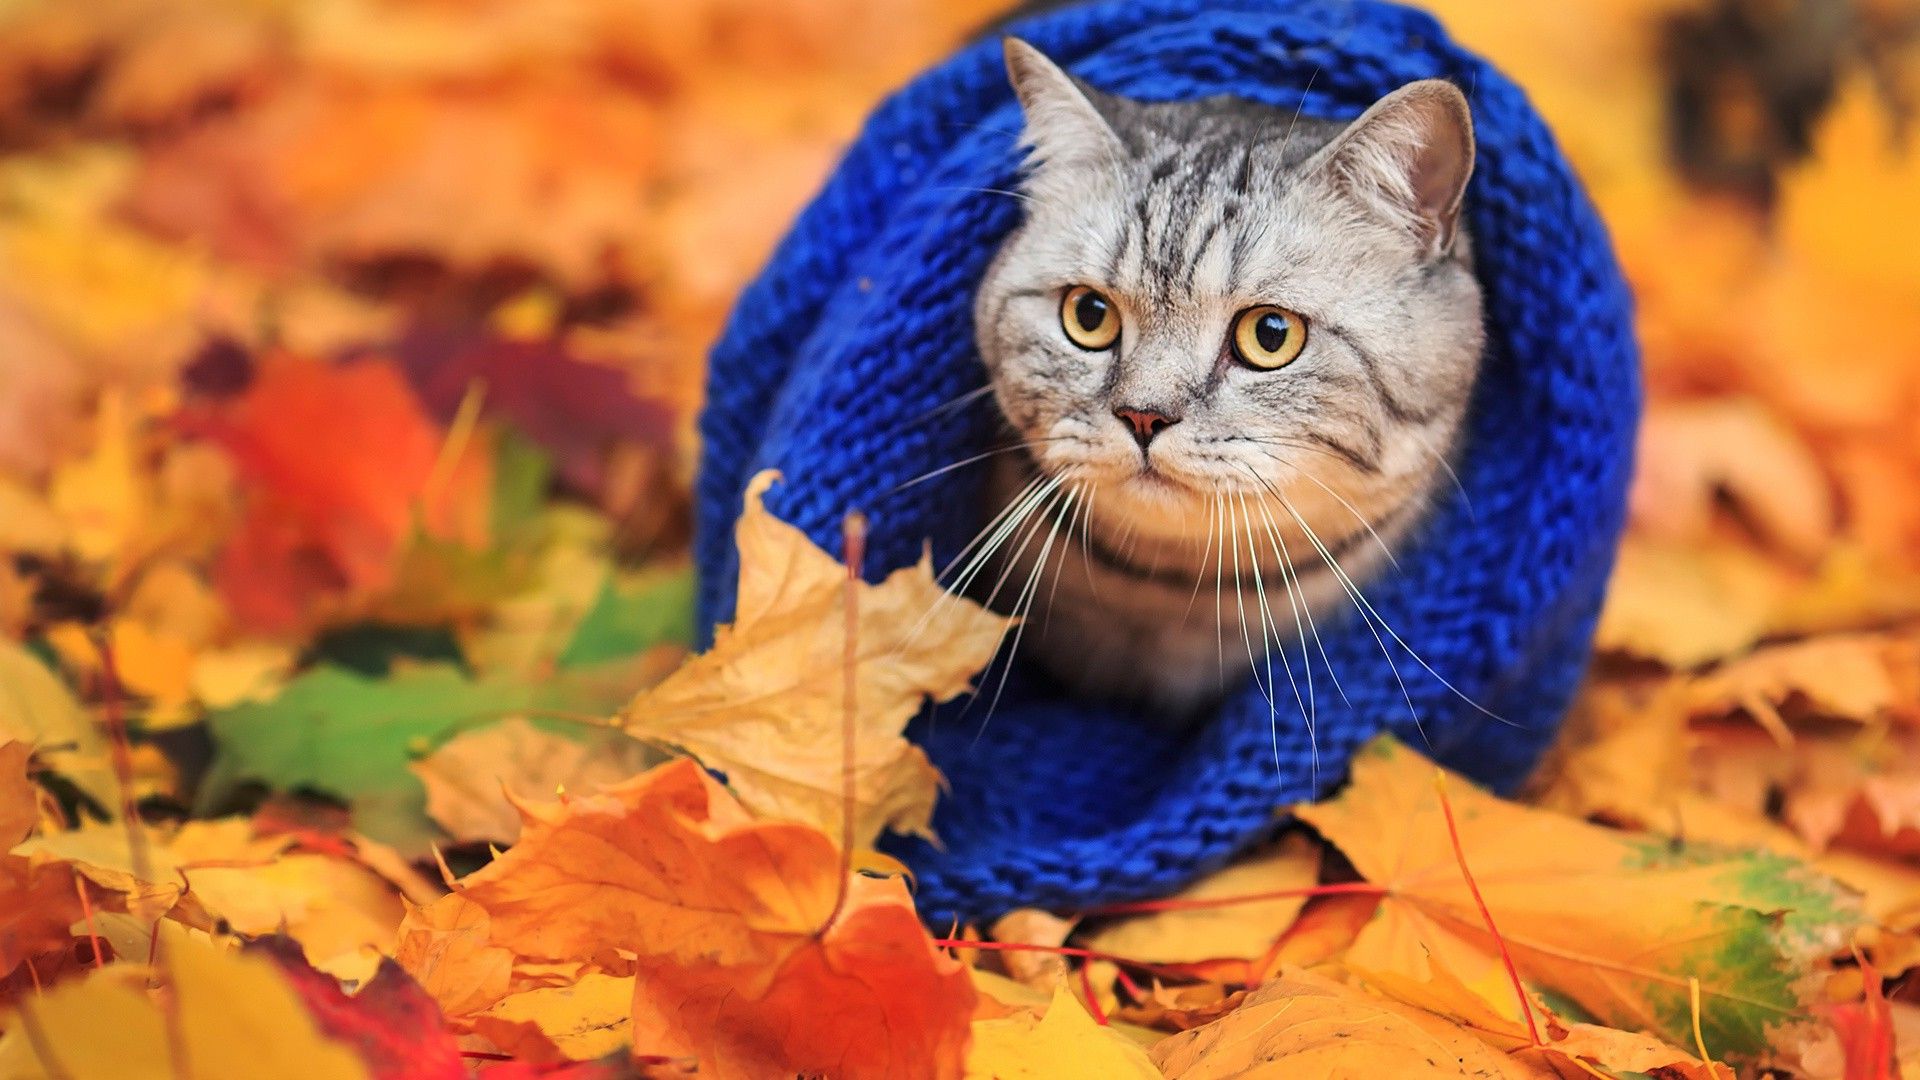 animals, Cat, Woolly Hat, Leaves, Fall Wallpaper HD / Desktop and Mobile Background